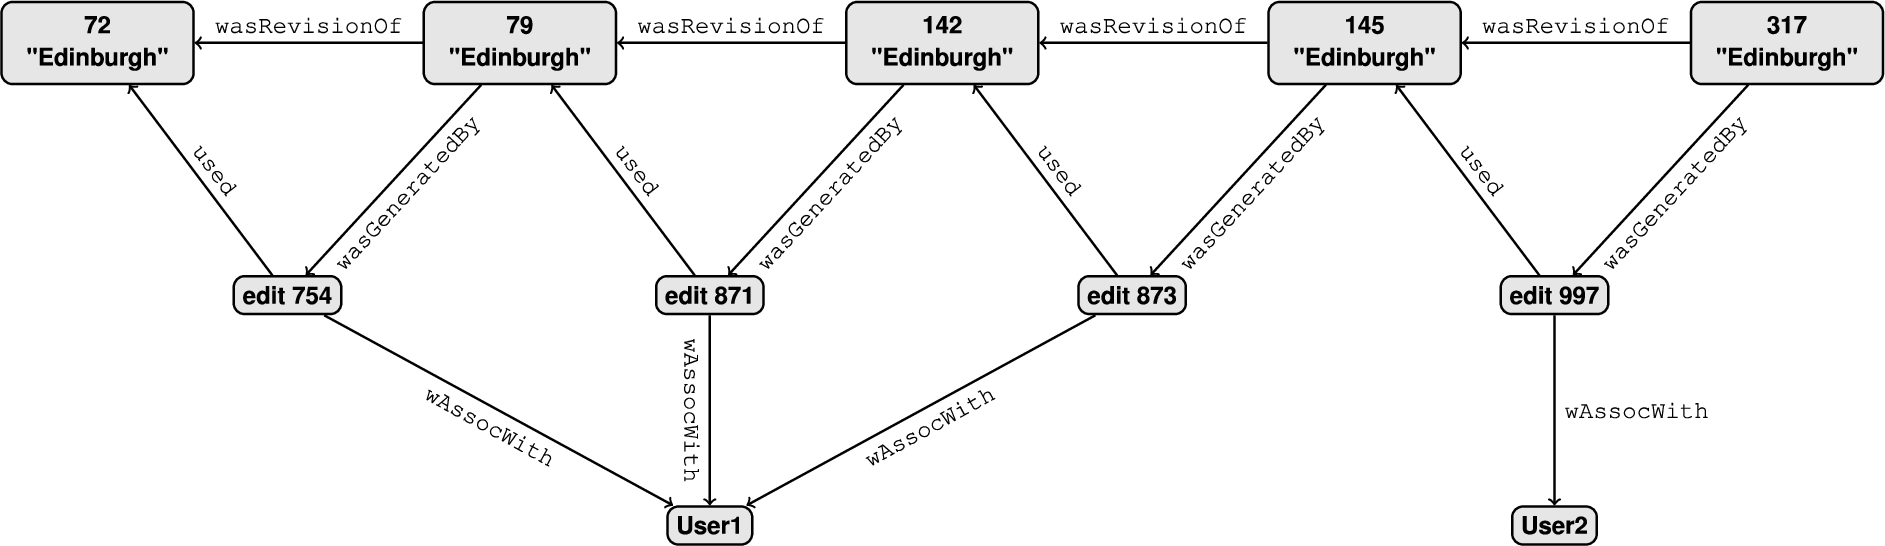 RDF database of Wikipedia traces. The abbreviation wAssocWith is used instead of wasAssociatedWith and the prov:prefix is omitted from all the properties in this graph.